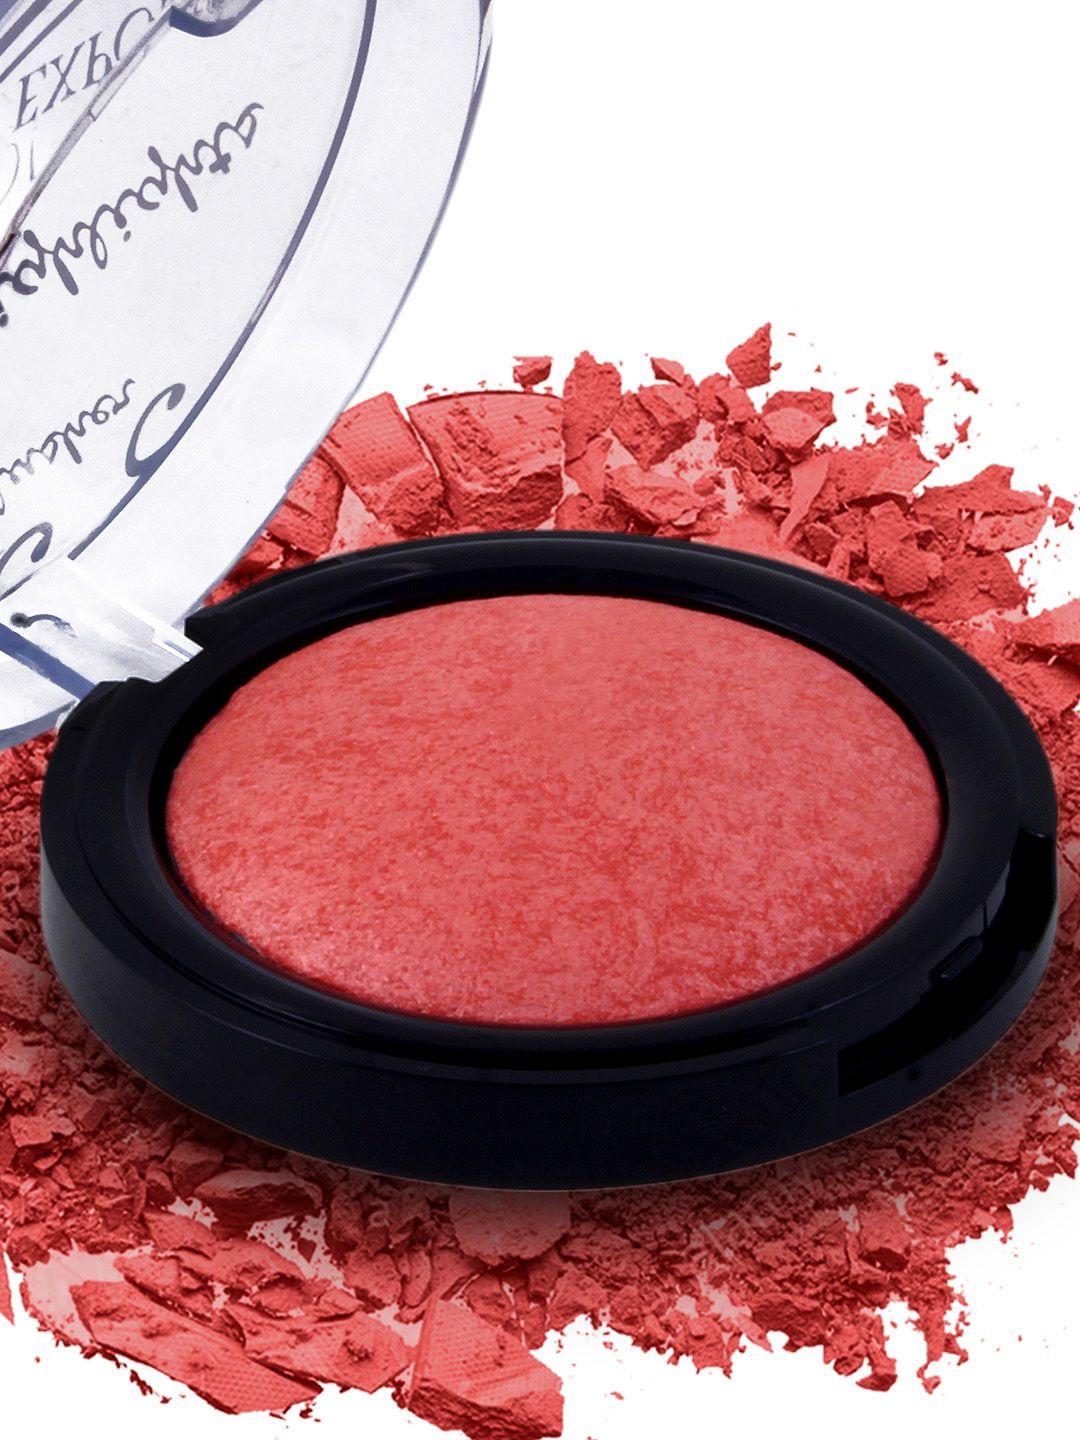 incolor exposed highlighter blusher tomato 22 - 9 g